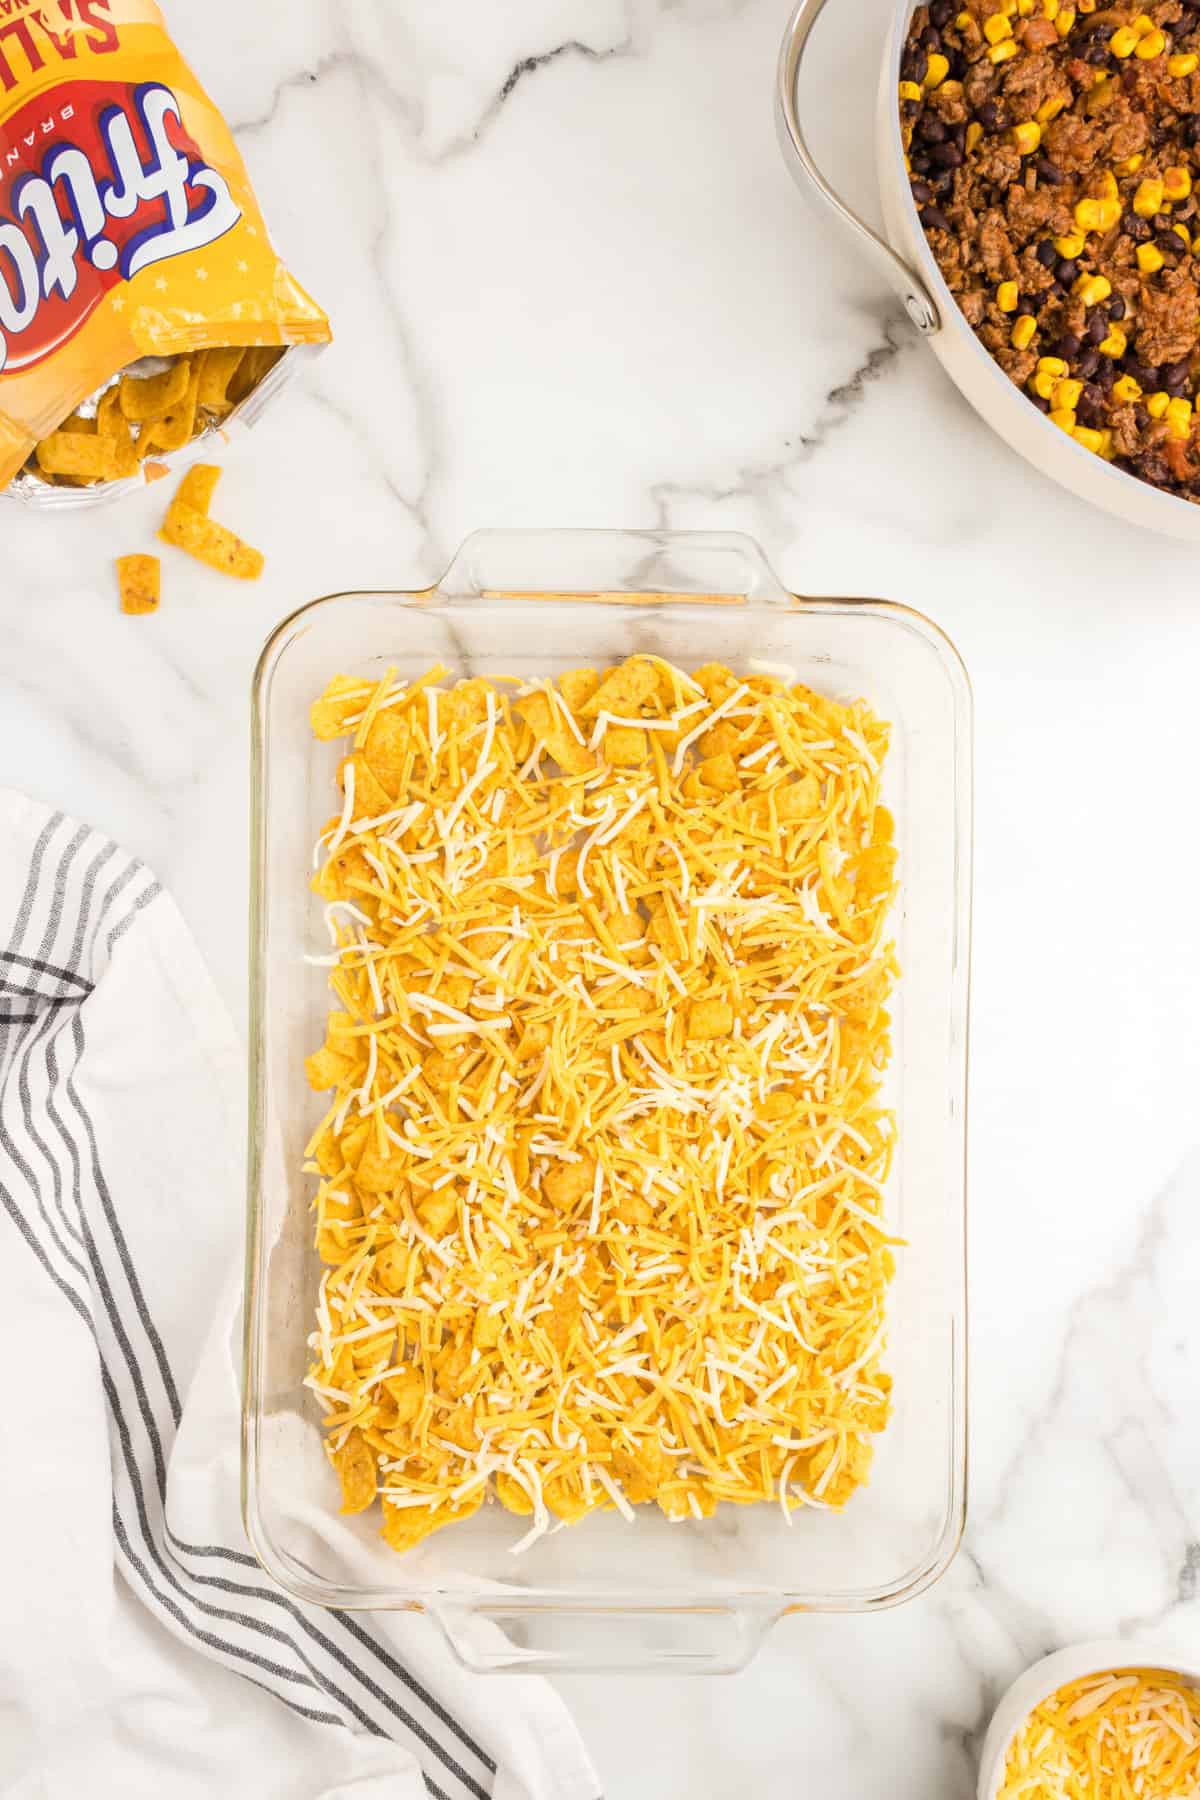 Topping Fritos layer with shredded cheese for Frito Pie Casserole